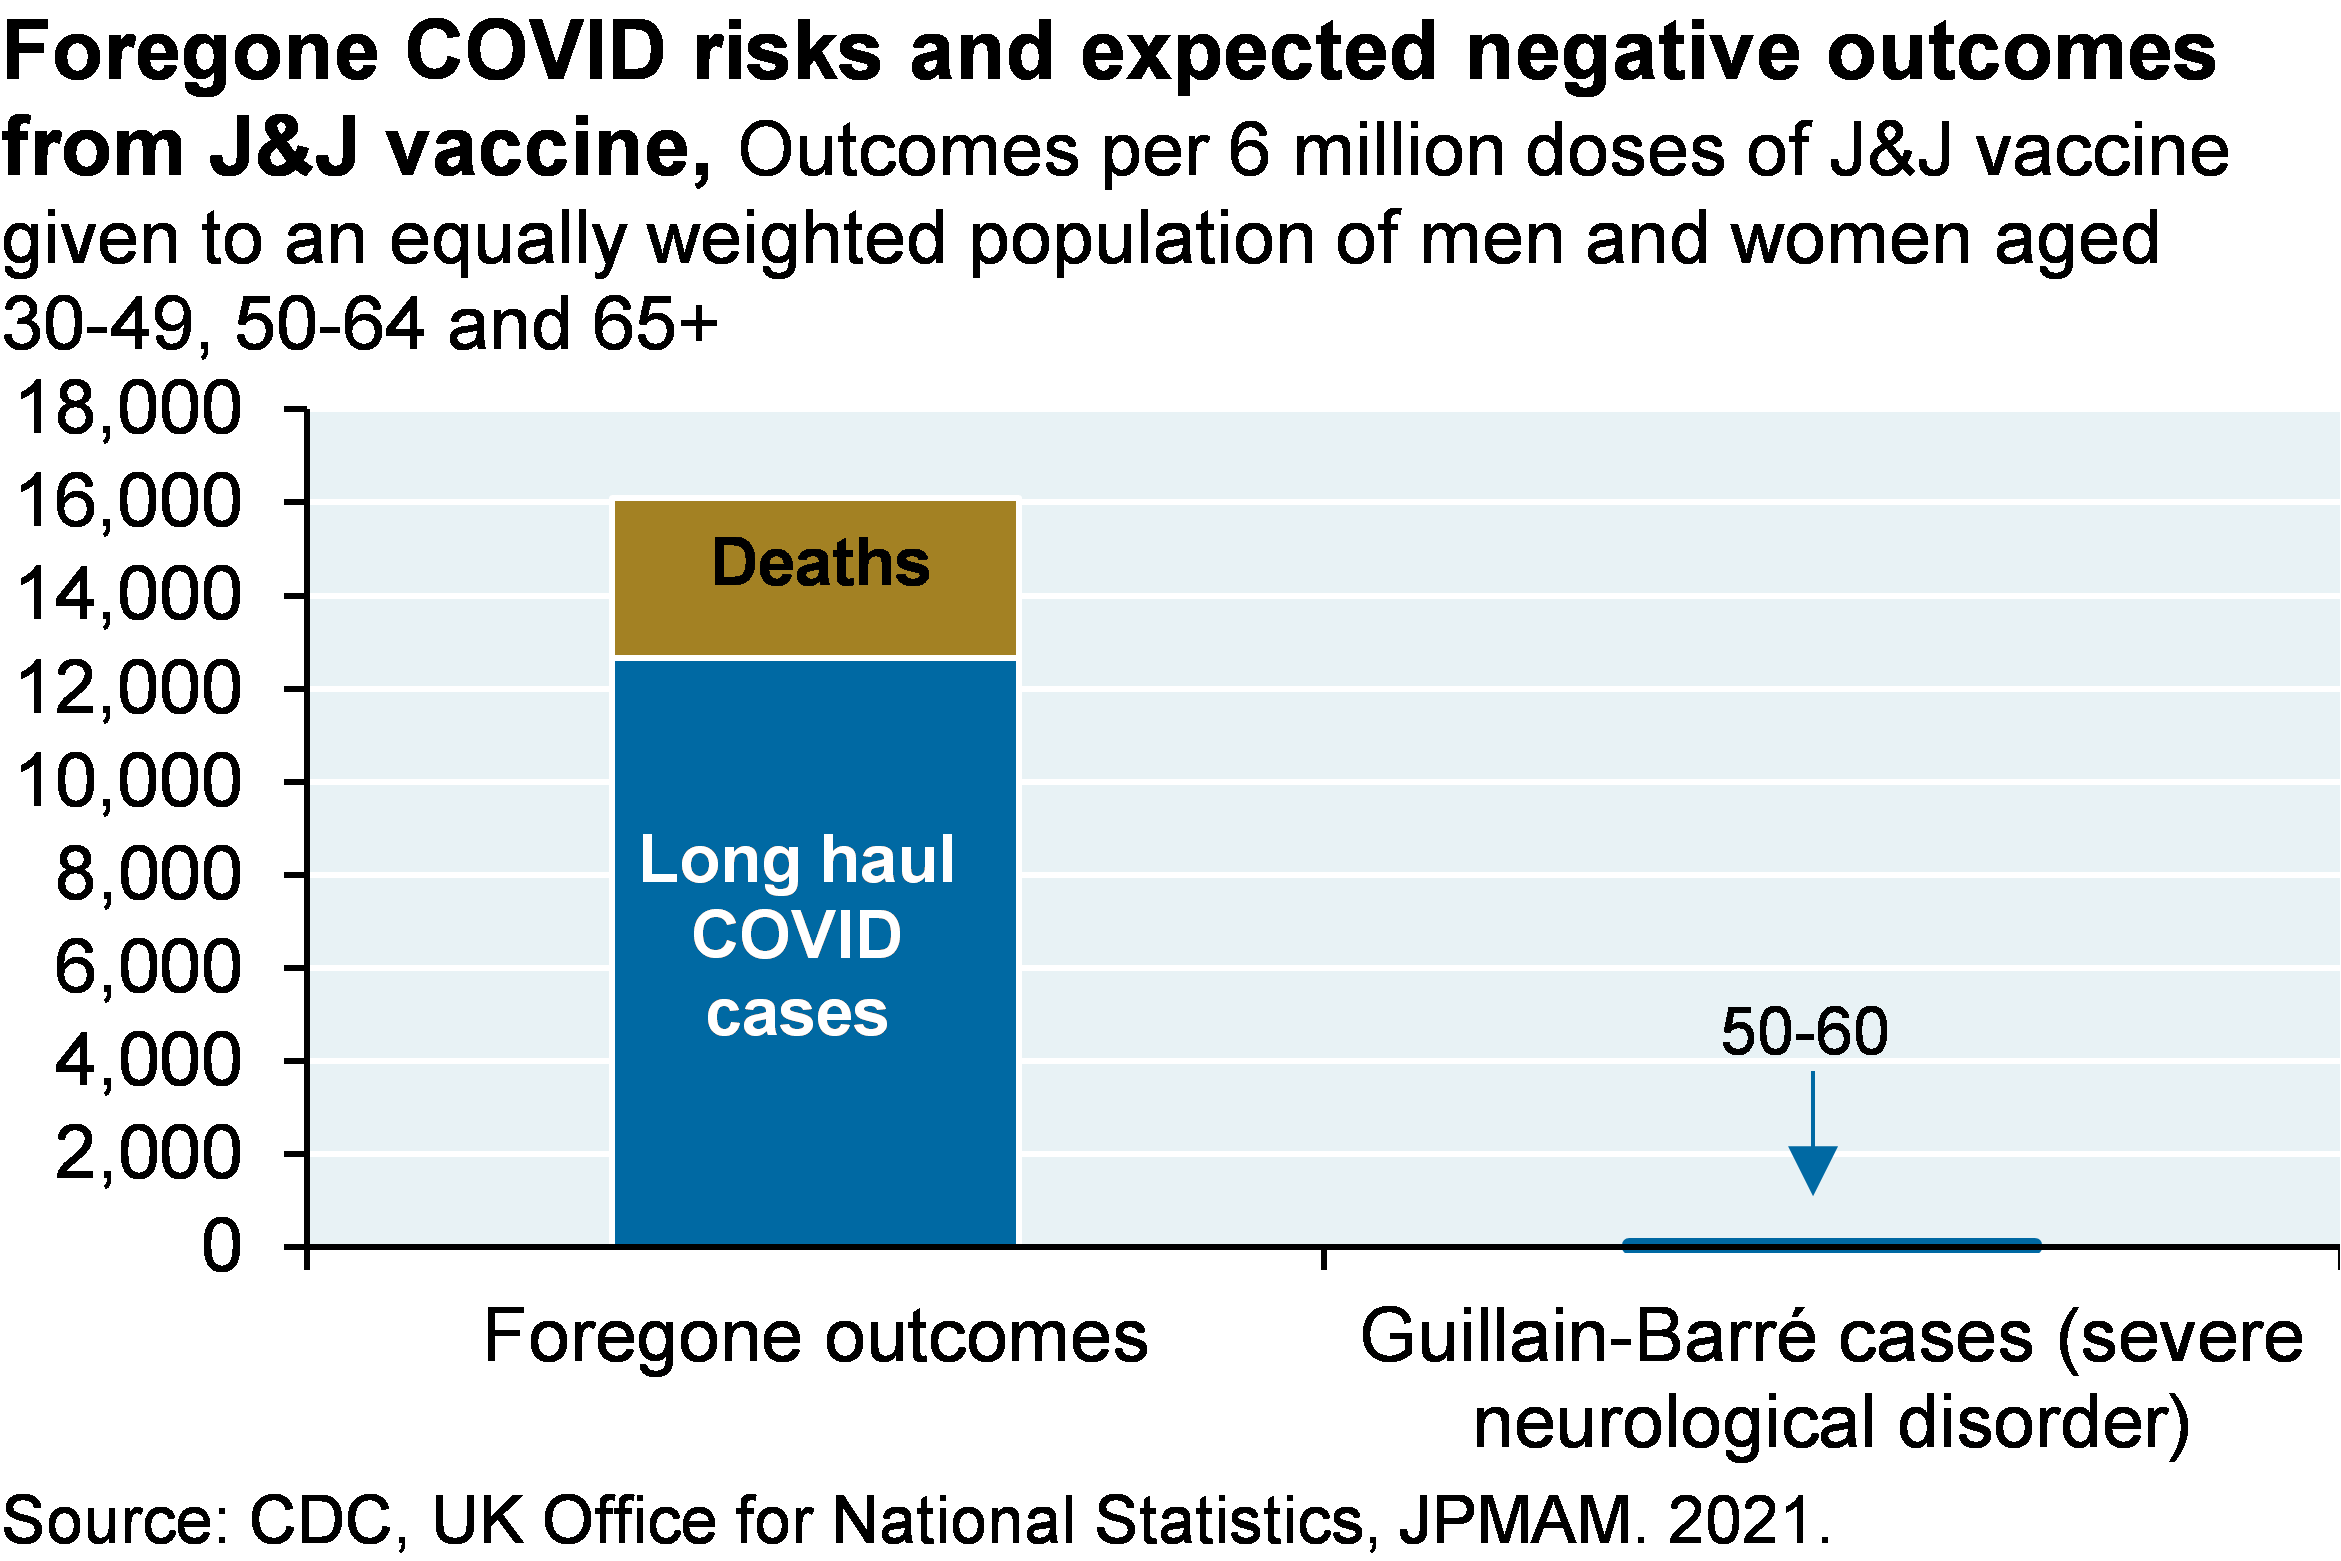 Bar chart shows foregone outcomes, including about 12,000 long haul COVID cases and about 4,000 deaths, per 6 million doses of J&J vaccines administered, compared to the 50-60 cases of Guillain-Barré, a severe neurological disorder. 